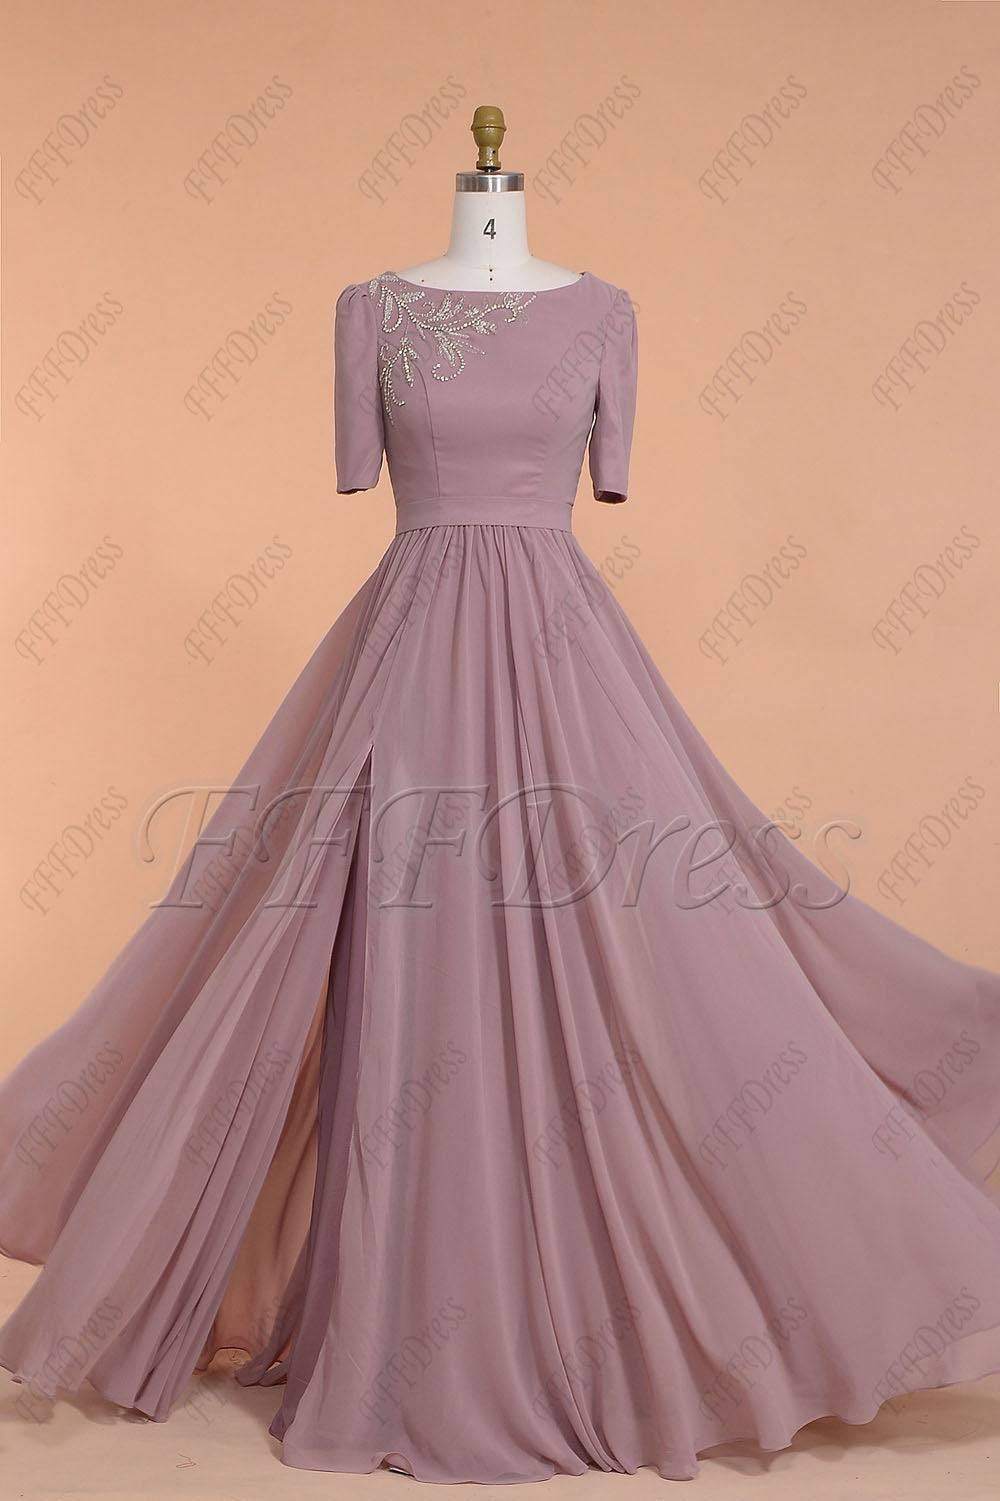 Dusty rose beaded modest slitted bridesmaid dress with sleeves